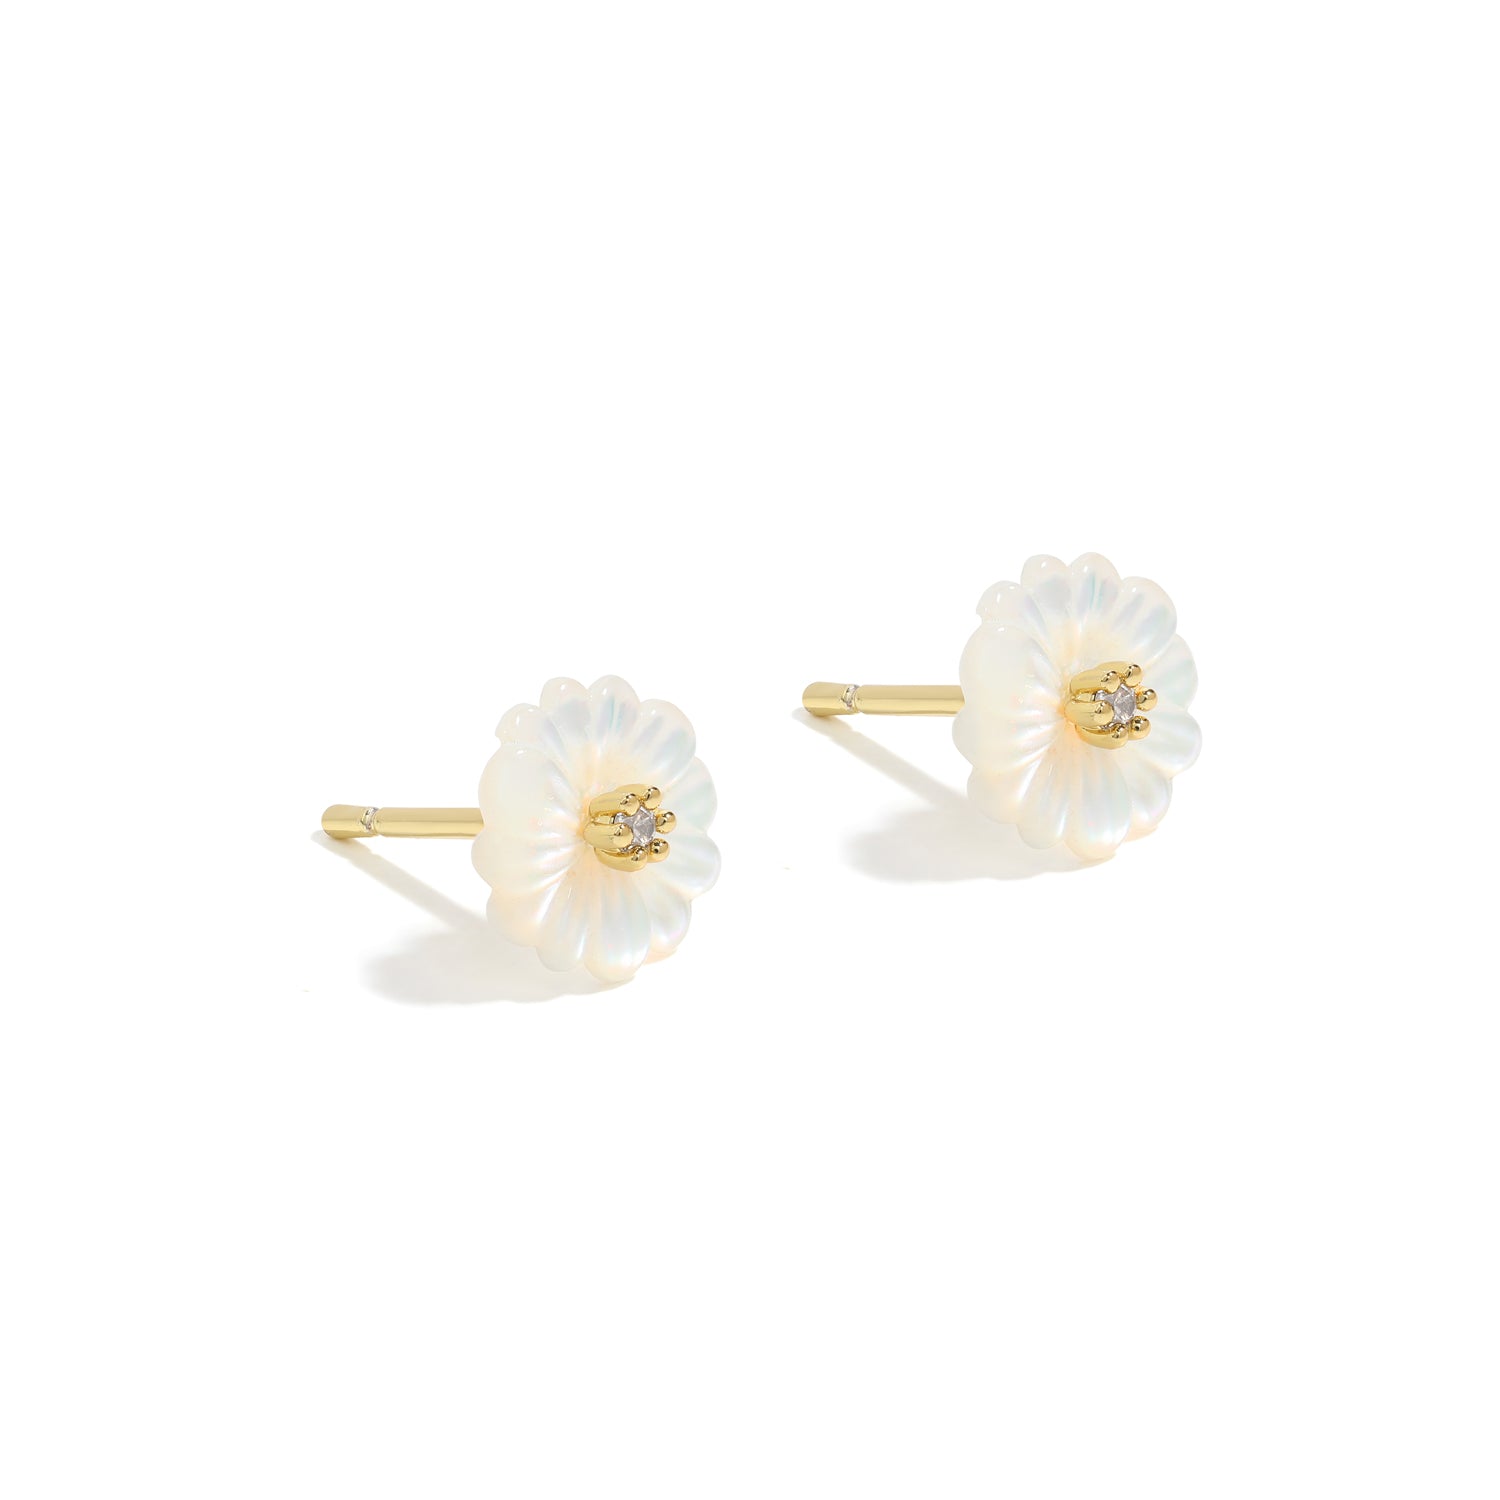 Simple and dainty studs. Gold earrings set with cubic zirconia stones.